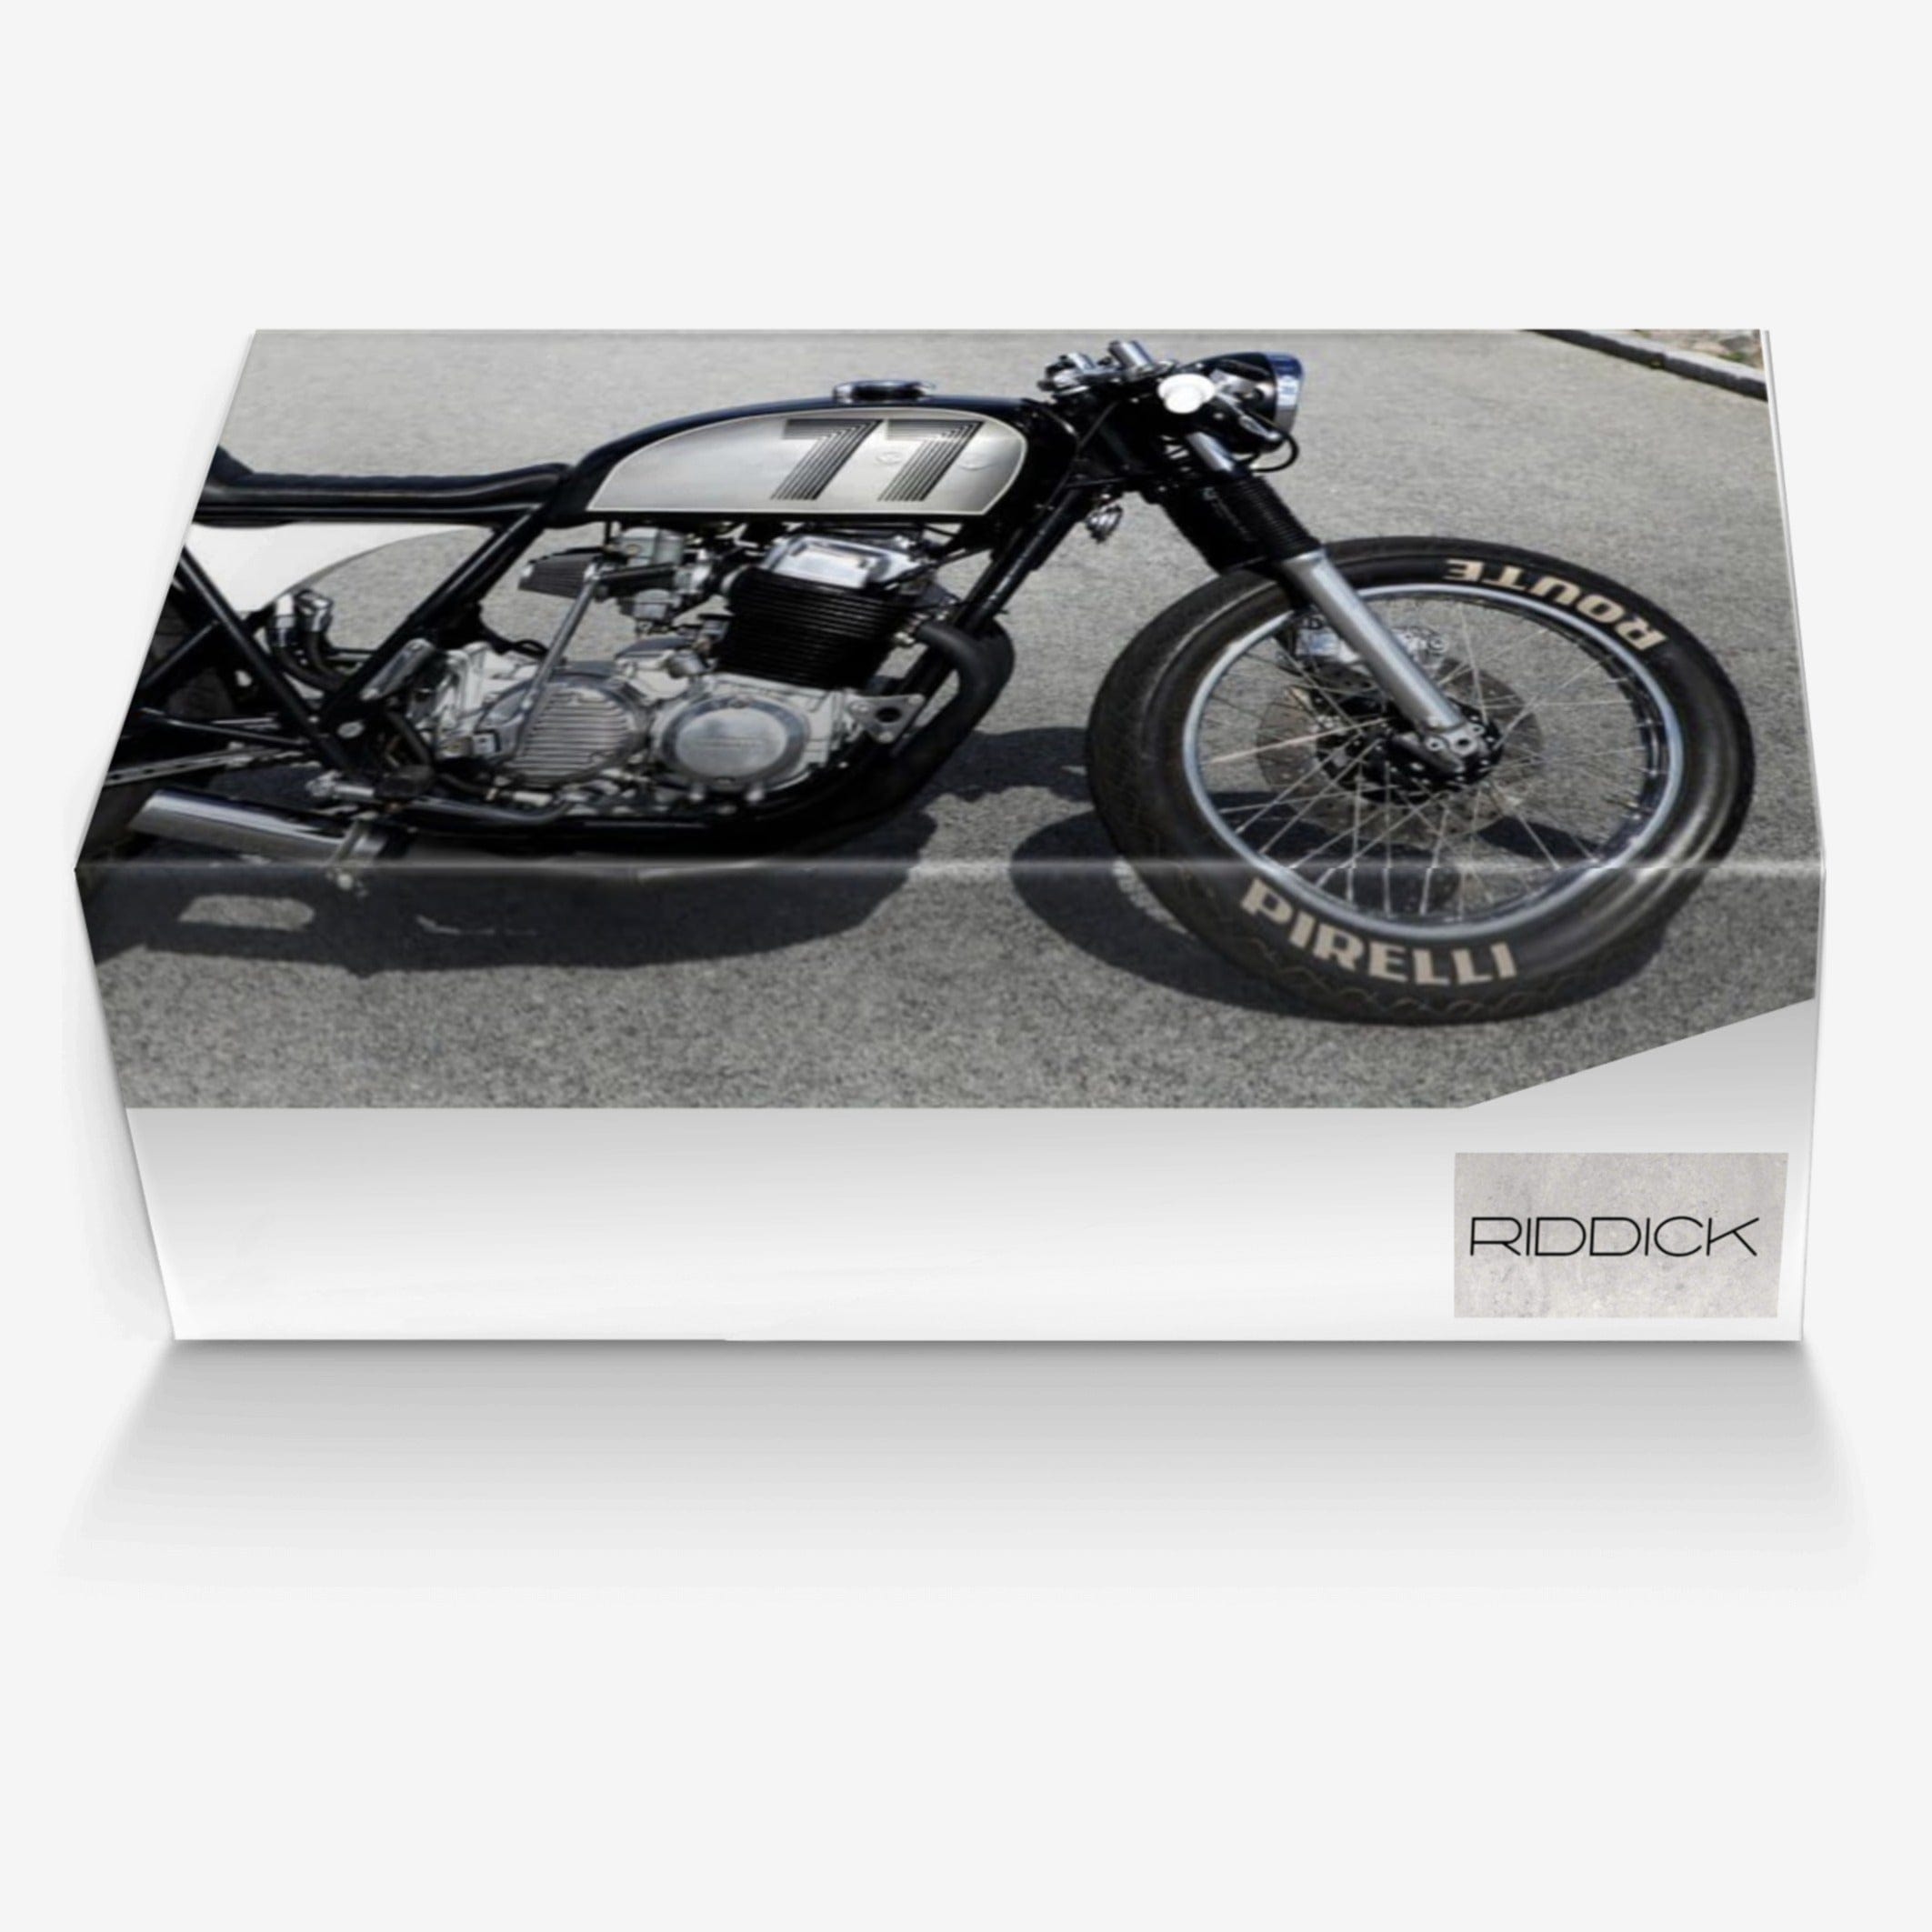 RIDER 77 [UNISEX. Collector's Display Box Included.] - Riddick Shoes Shoe Riddick Shoes   